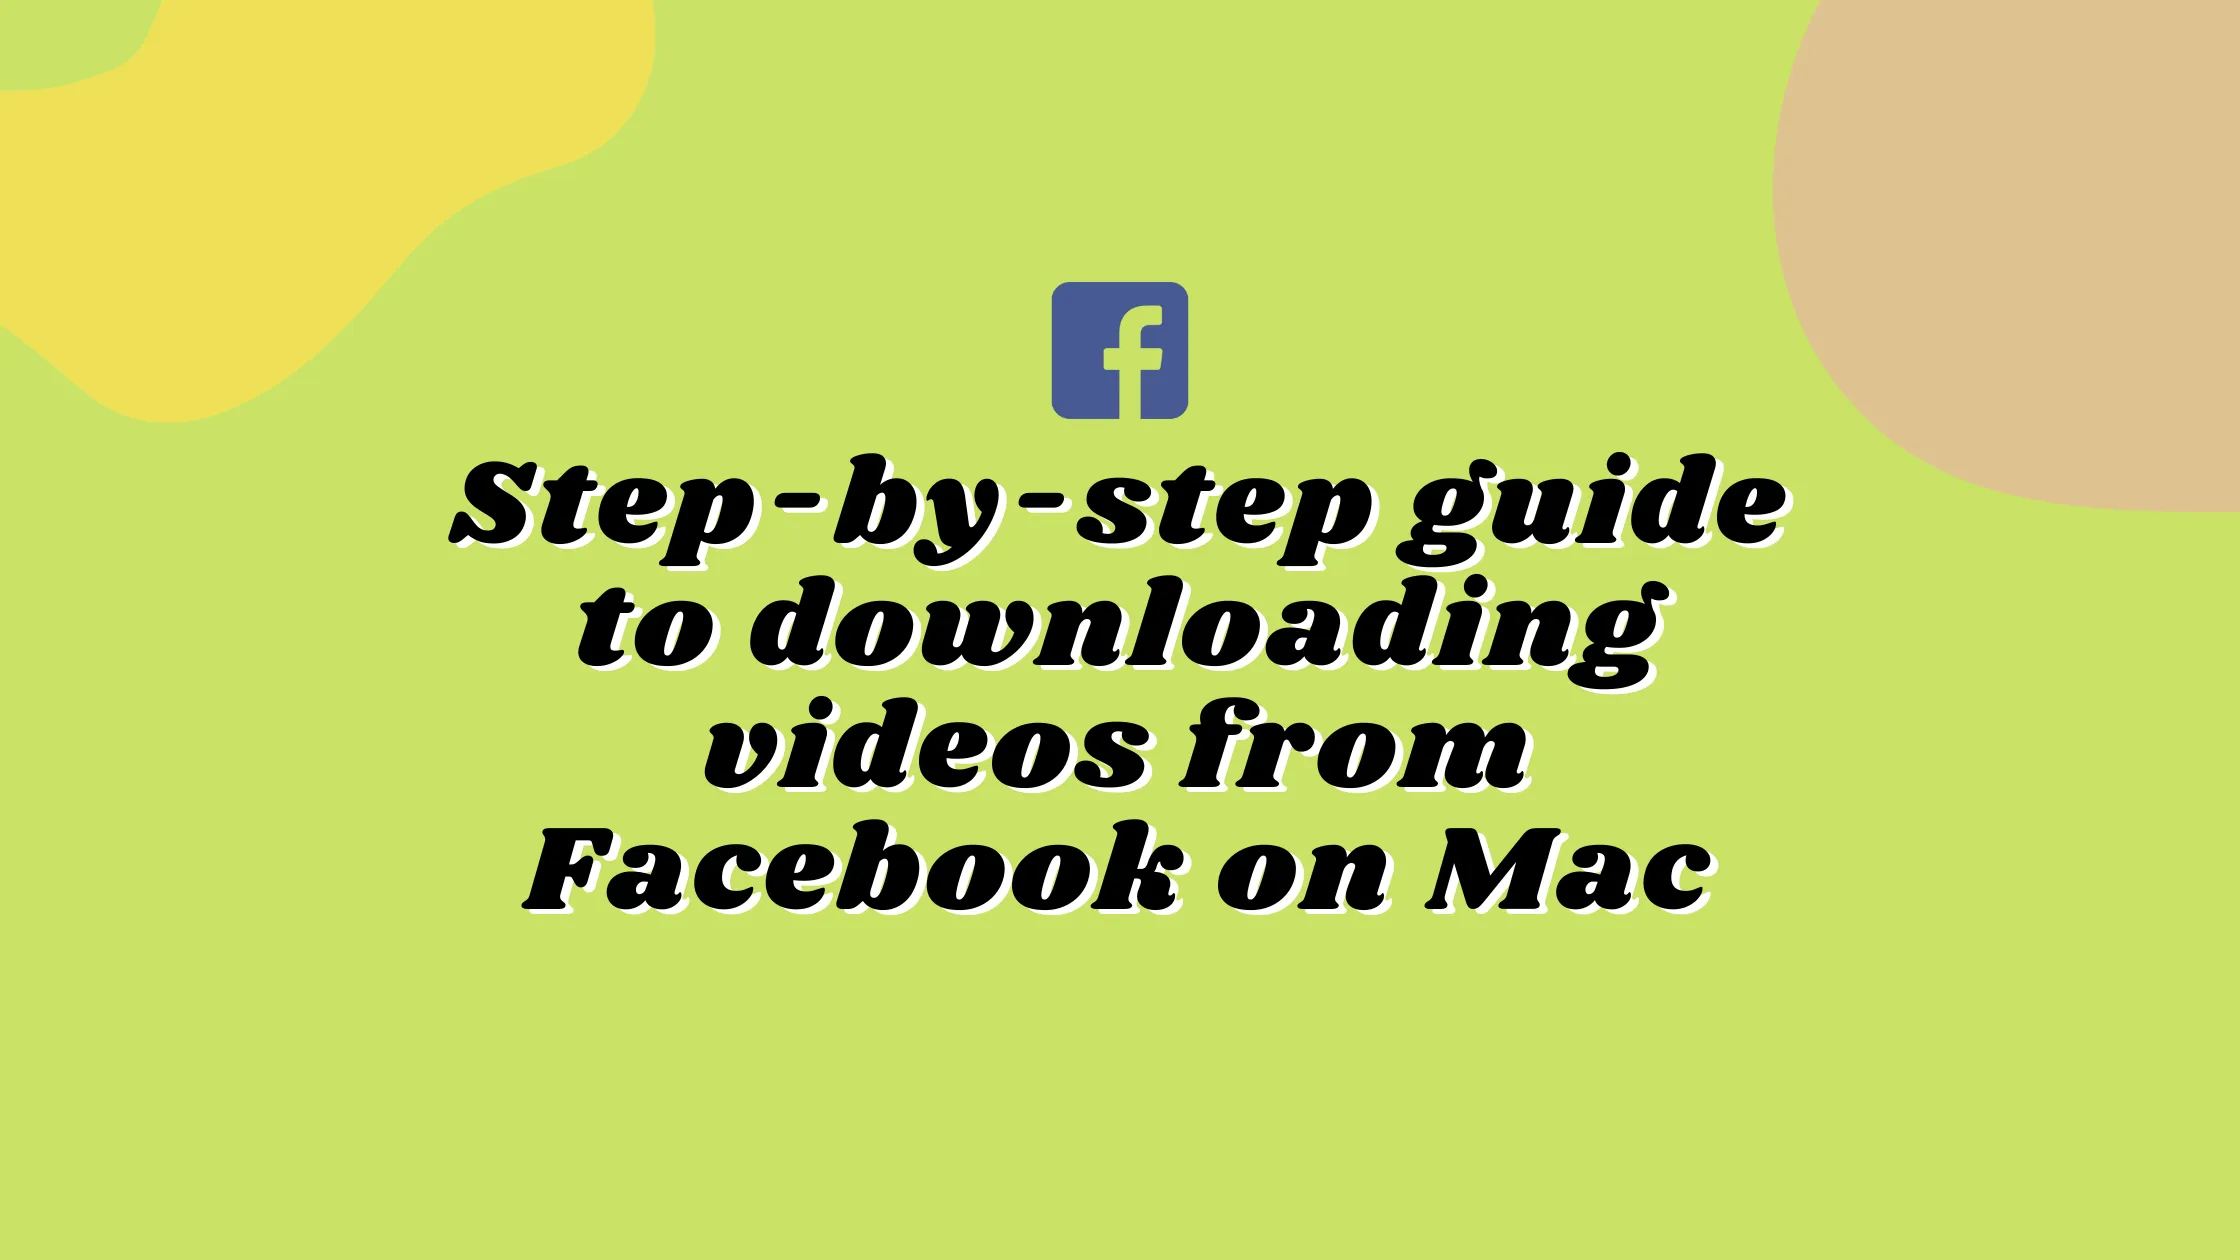 A step-by-step guide to downloading videos from Facebook on Mac